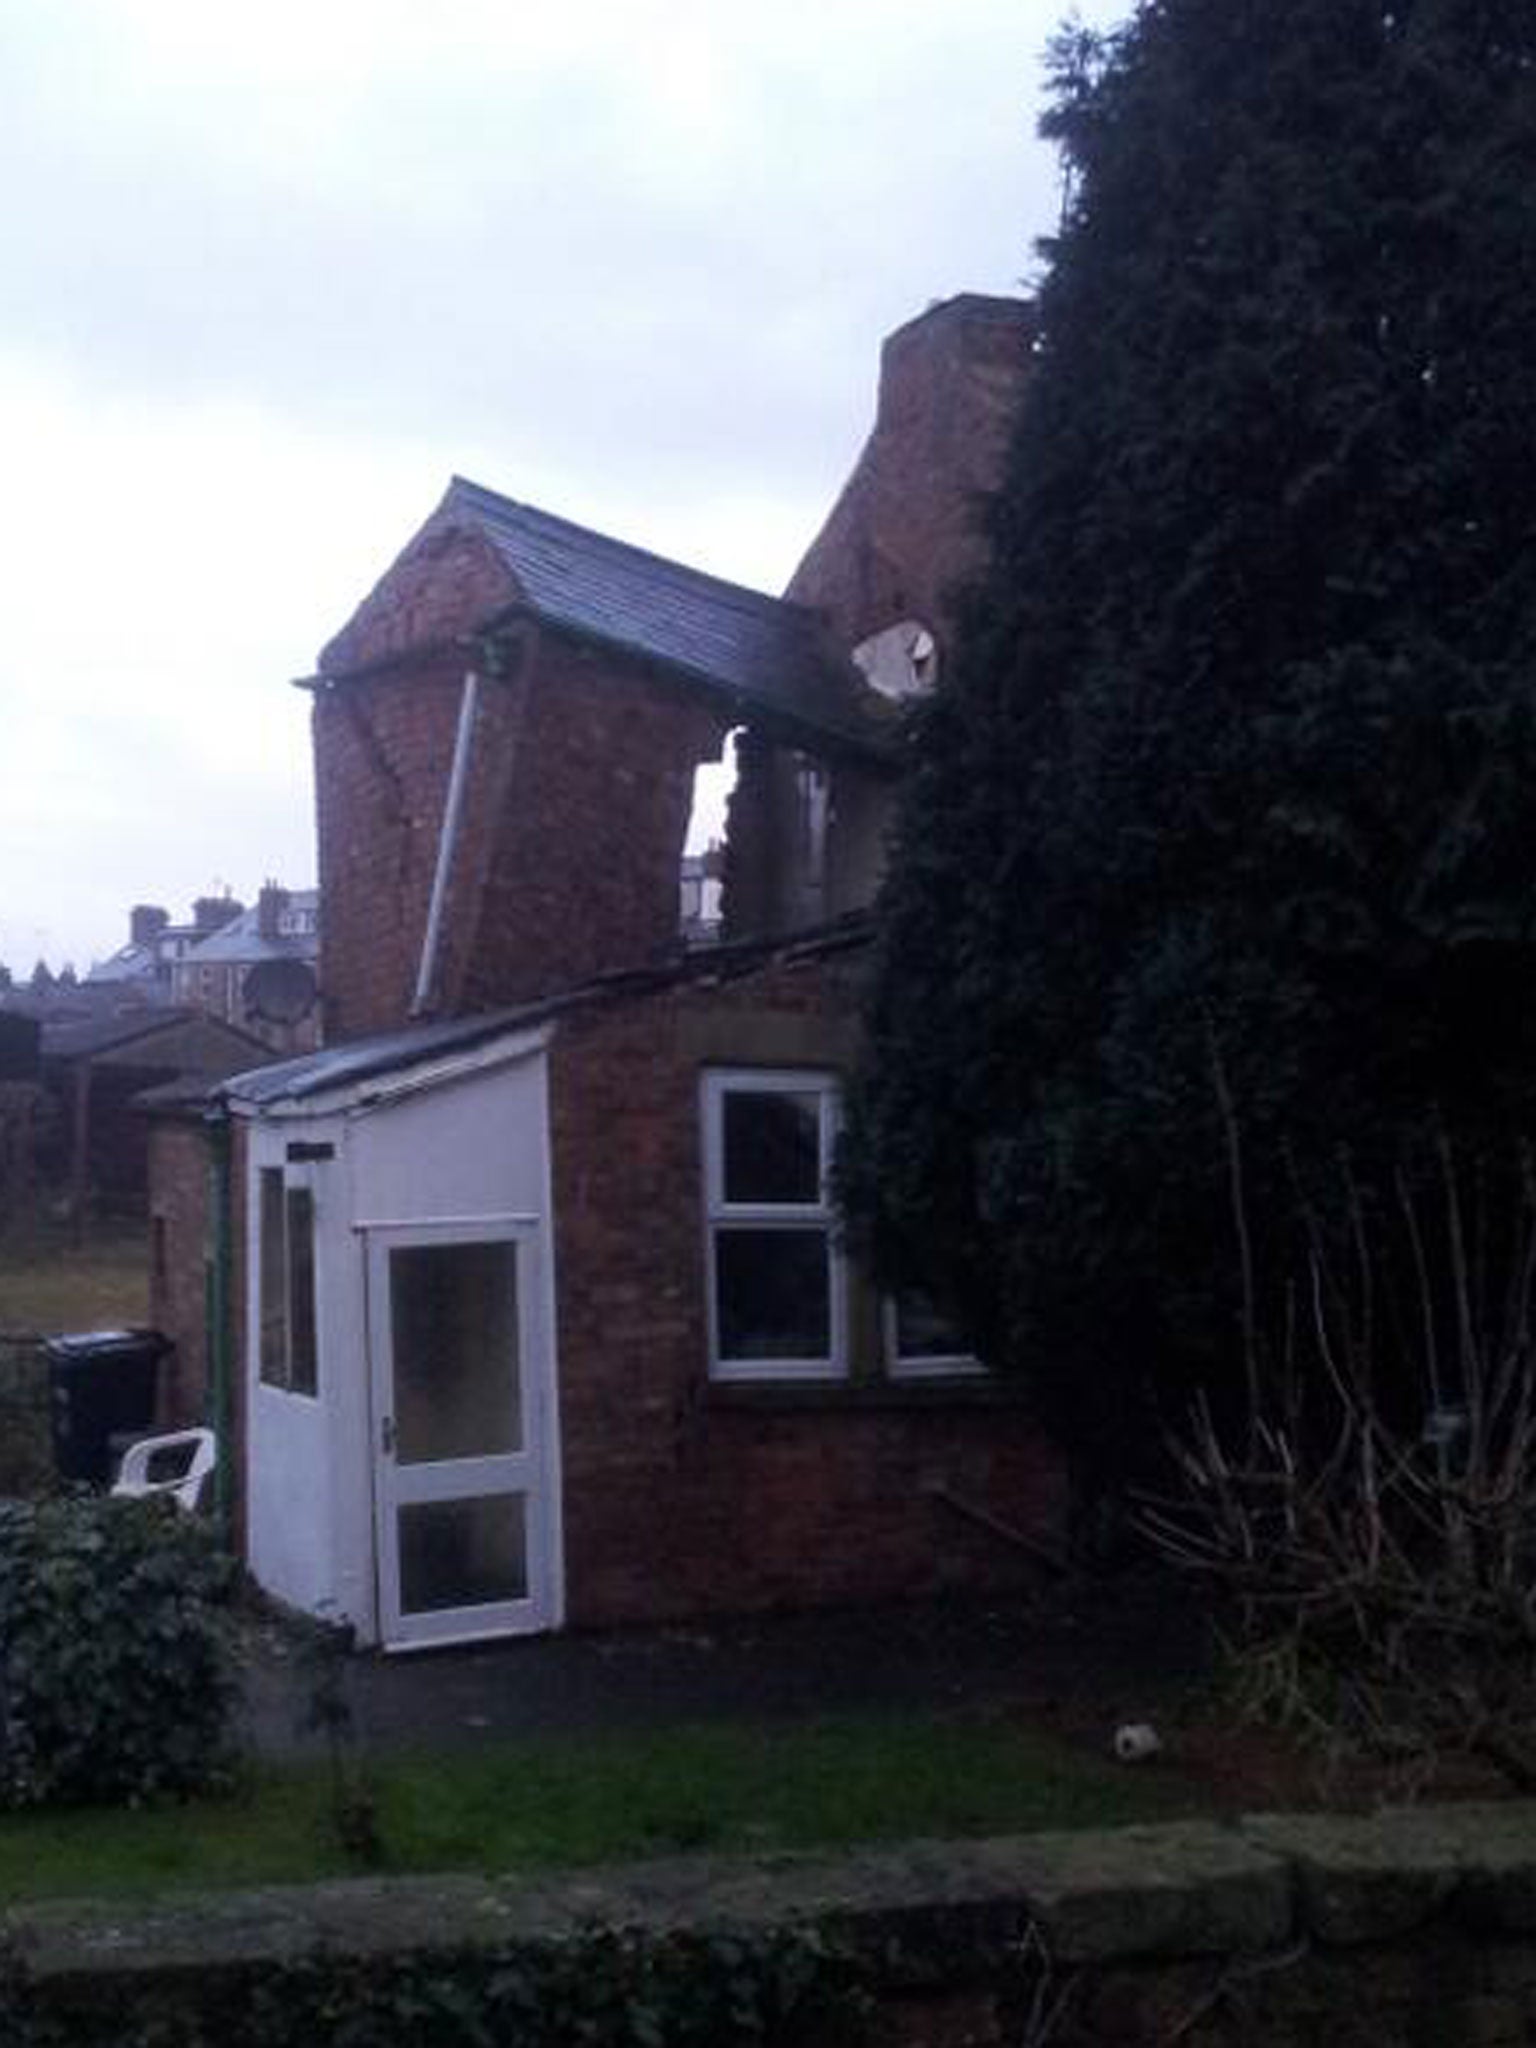 A sinkhole has caused extensive damage to a home in Ripon, north Yorkshire, leading to fears it could collapse completely and the evacuation of surrounding properties